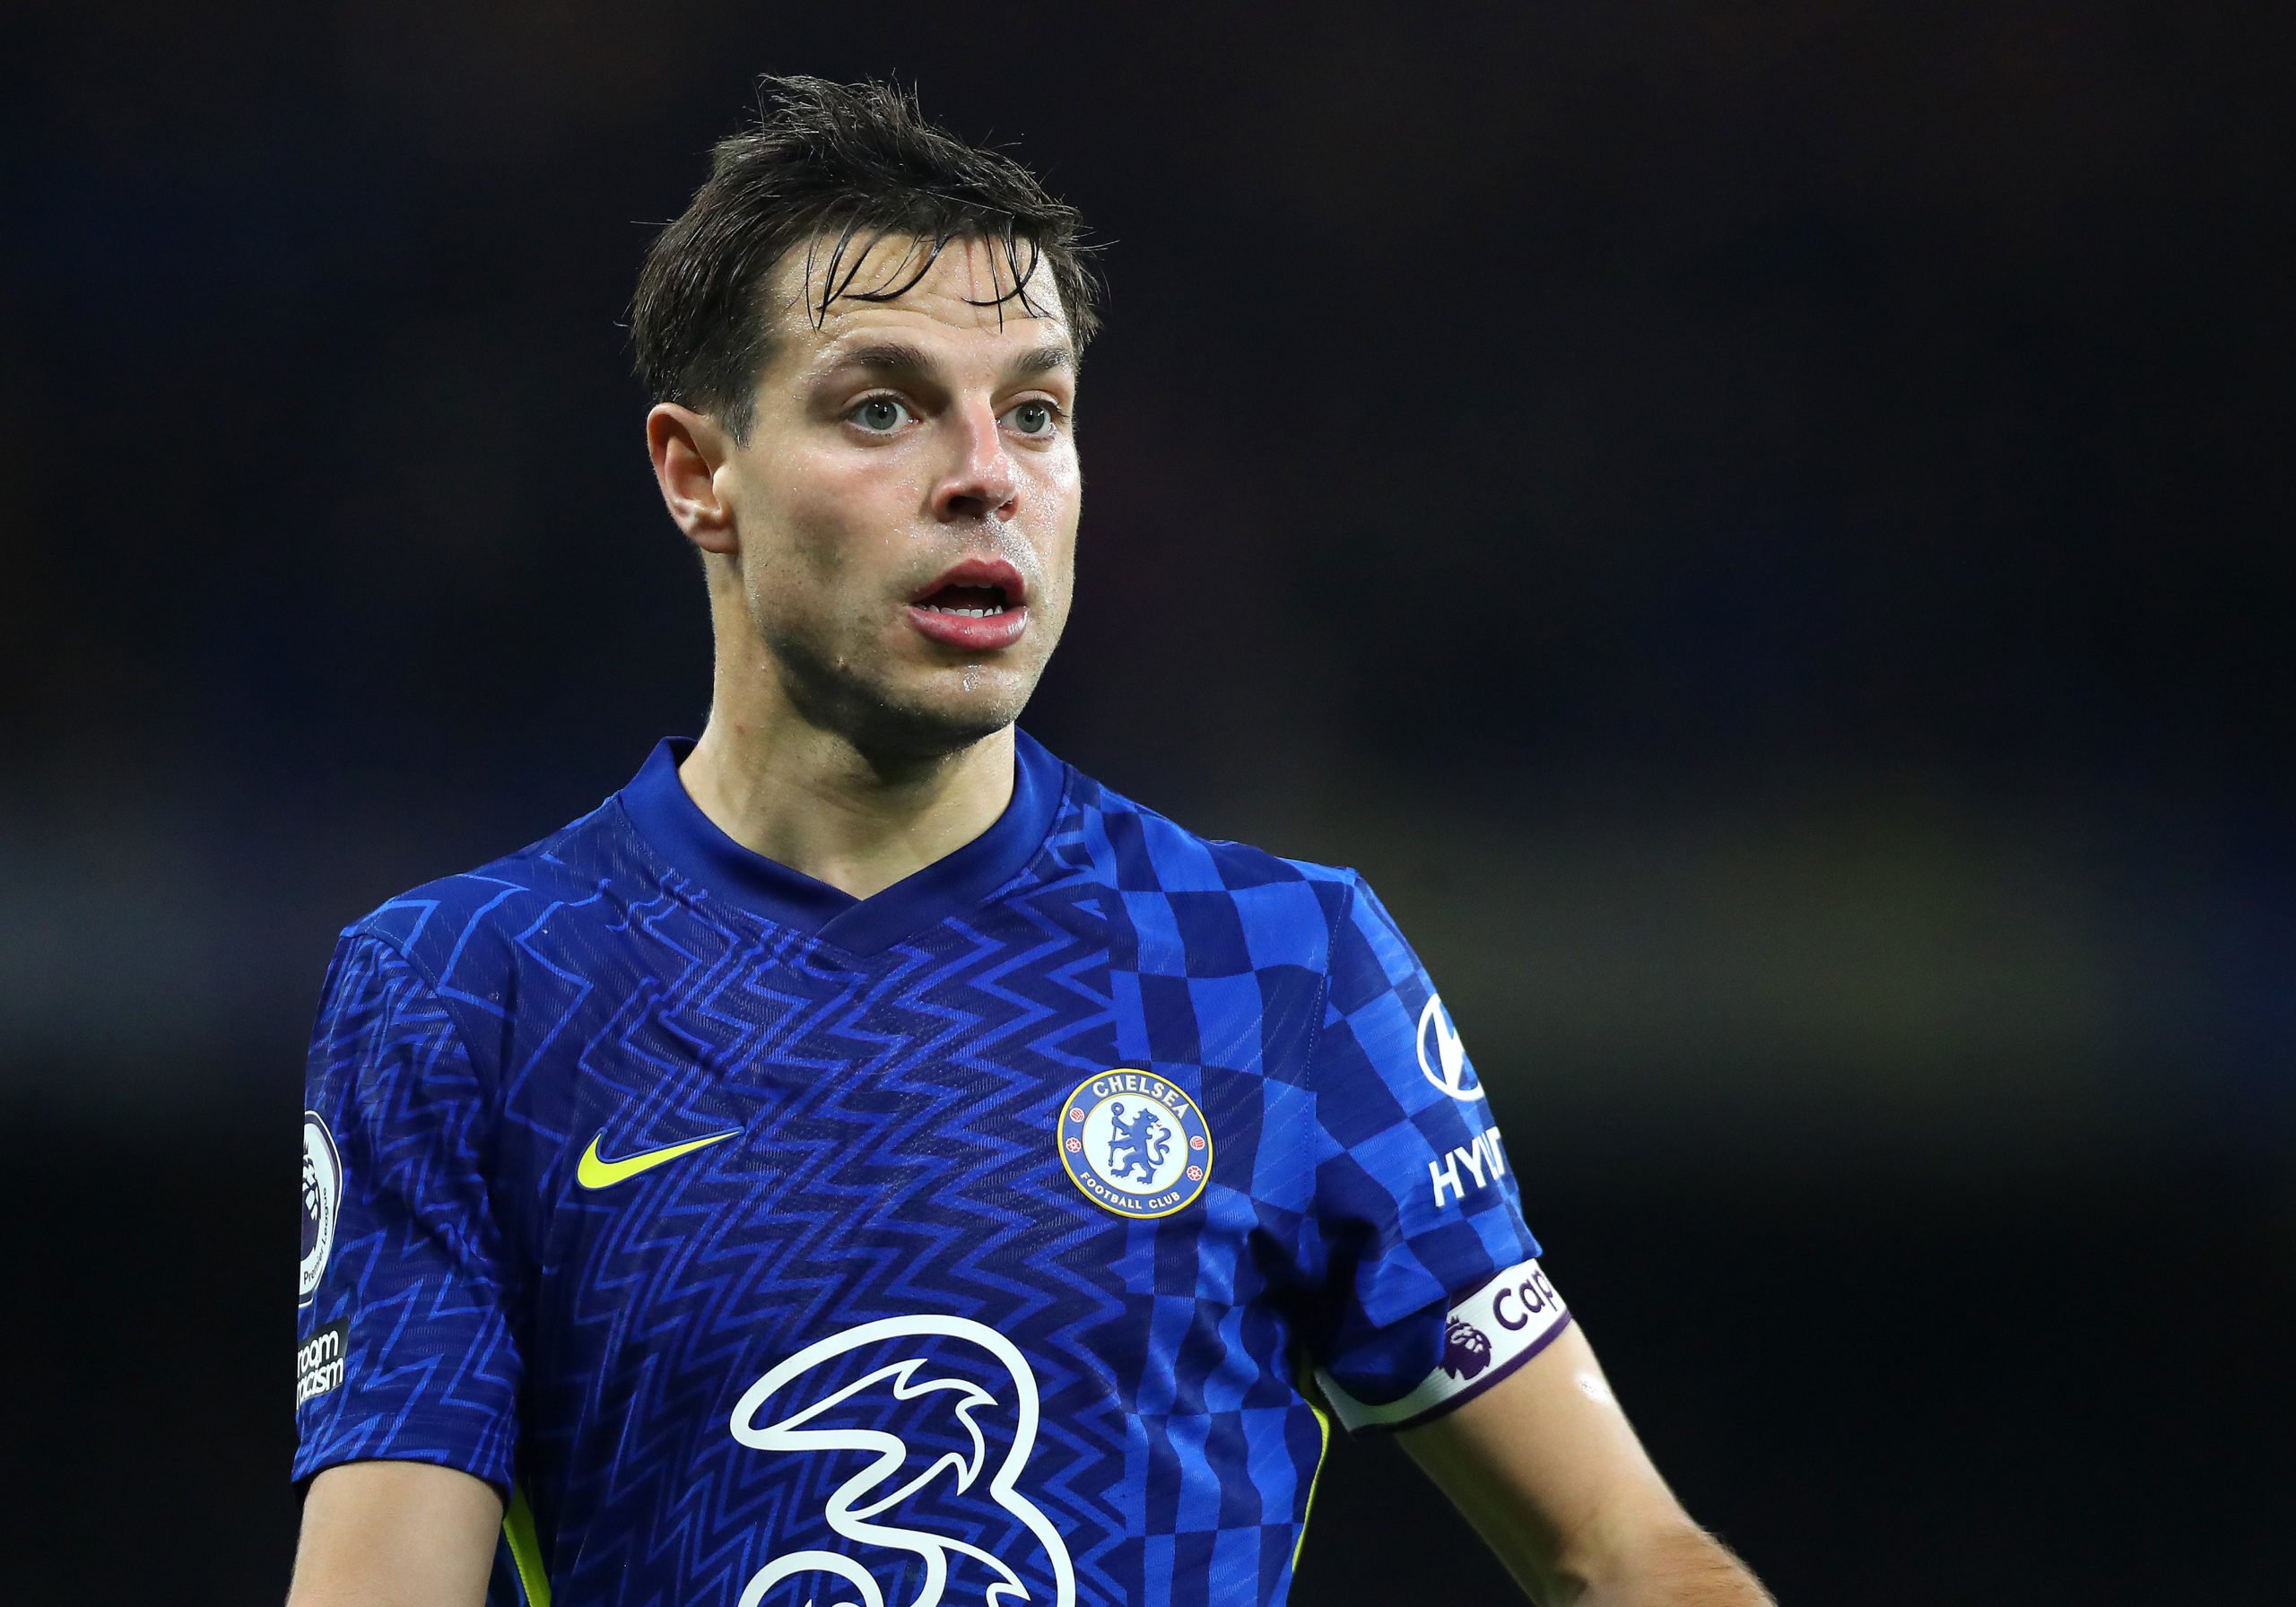 Azpilicueta says impactful teammate has proved he is 'big player' for Chelsea